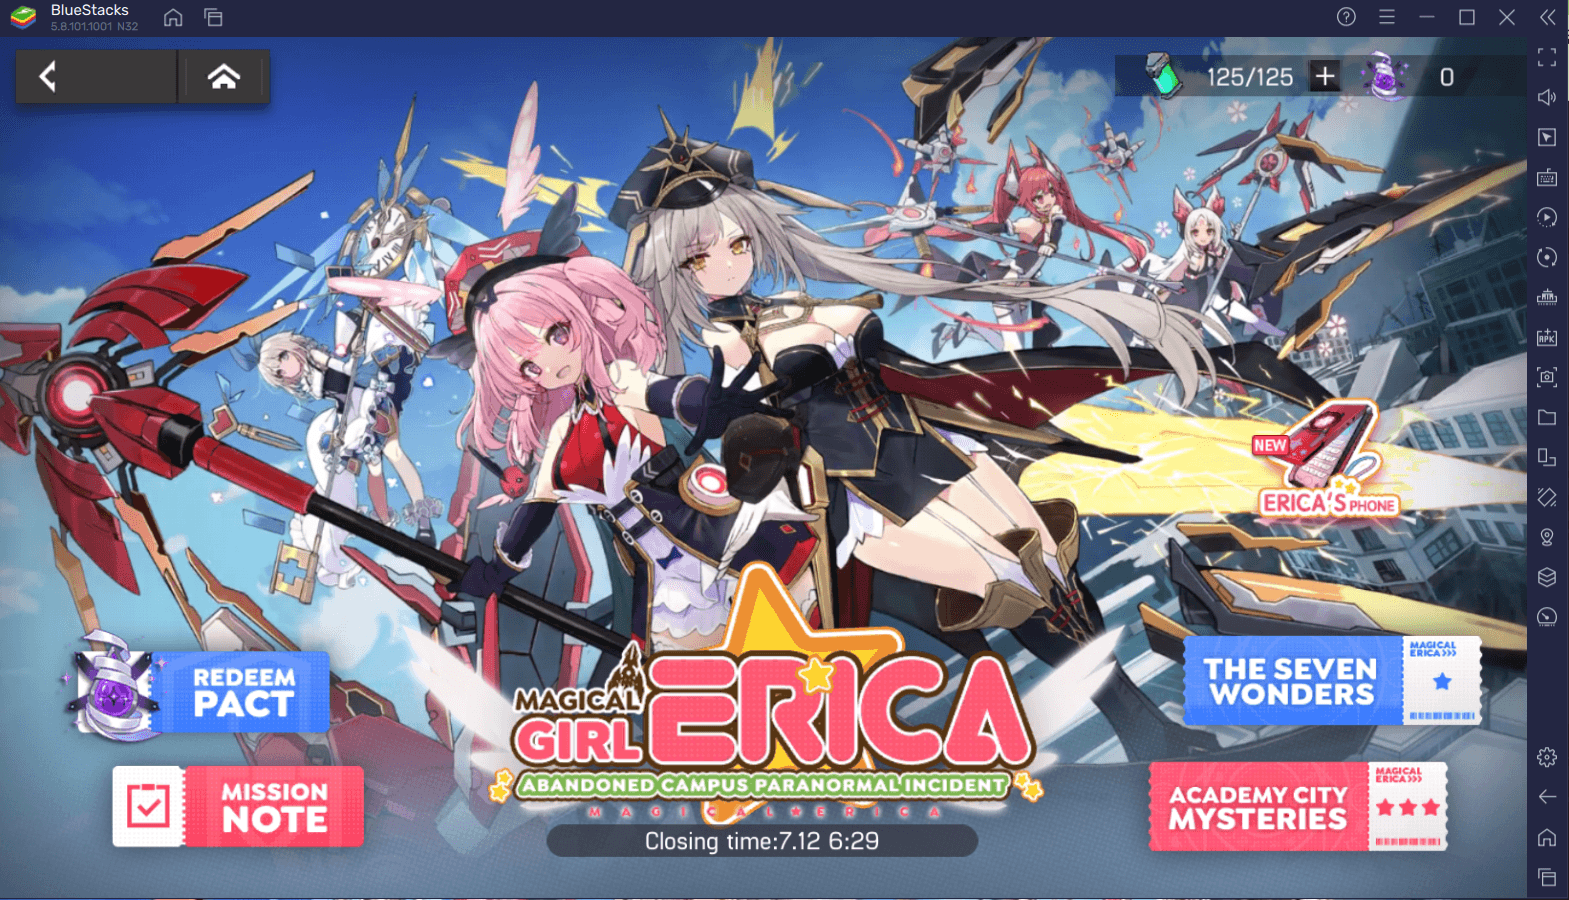 Artery Gear: Fusion – Magical Girl Erica Limited-Time Event